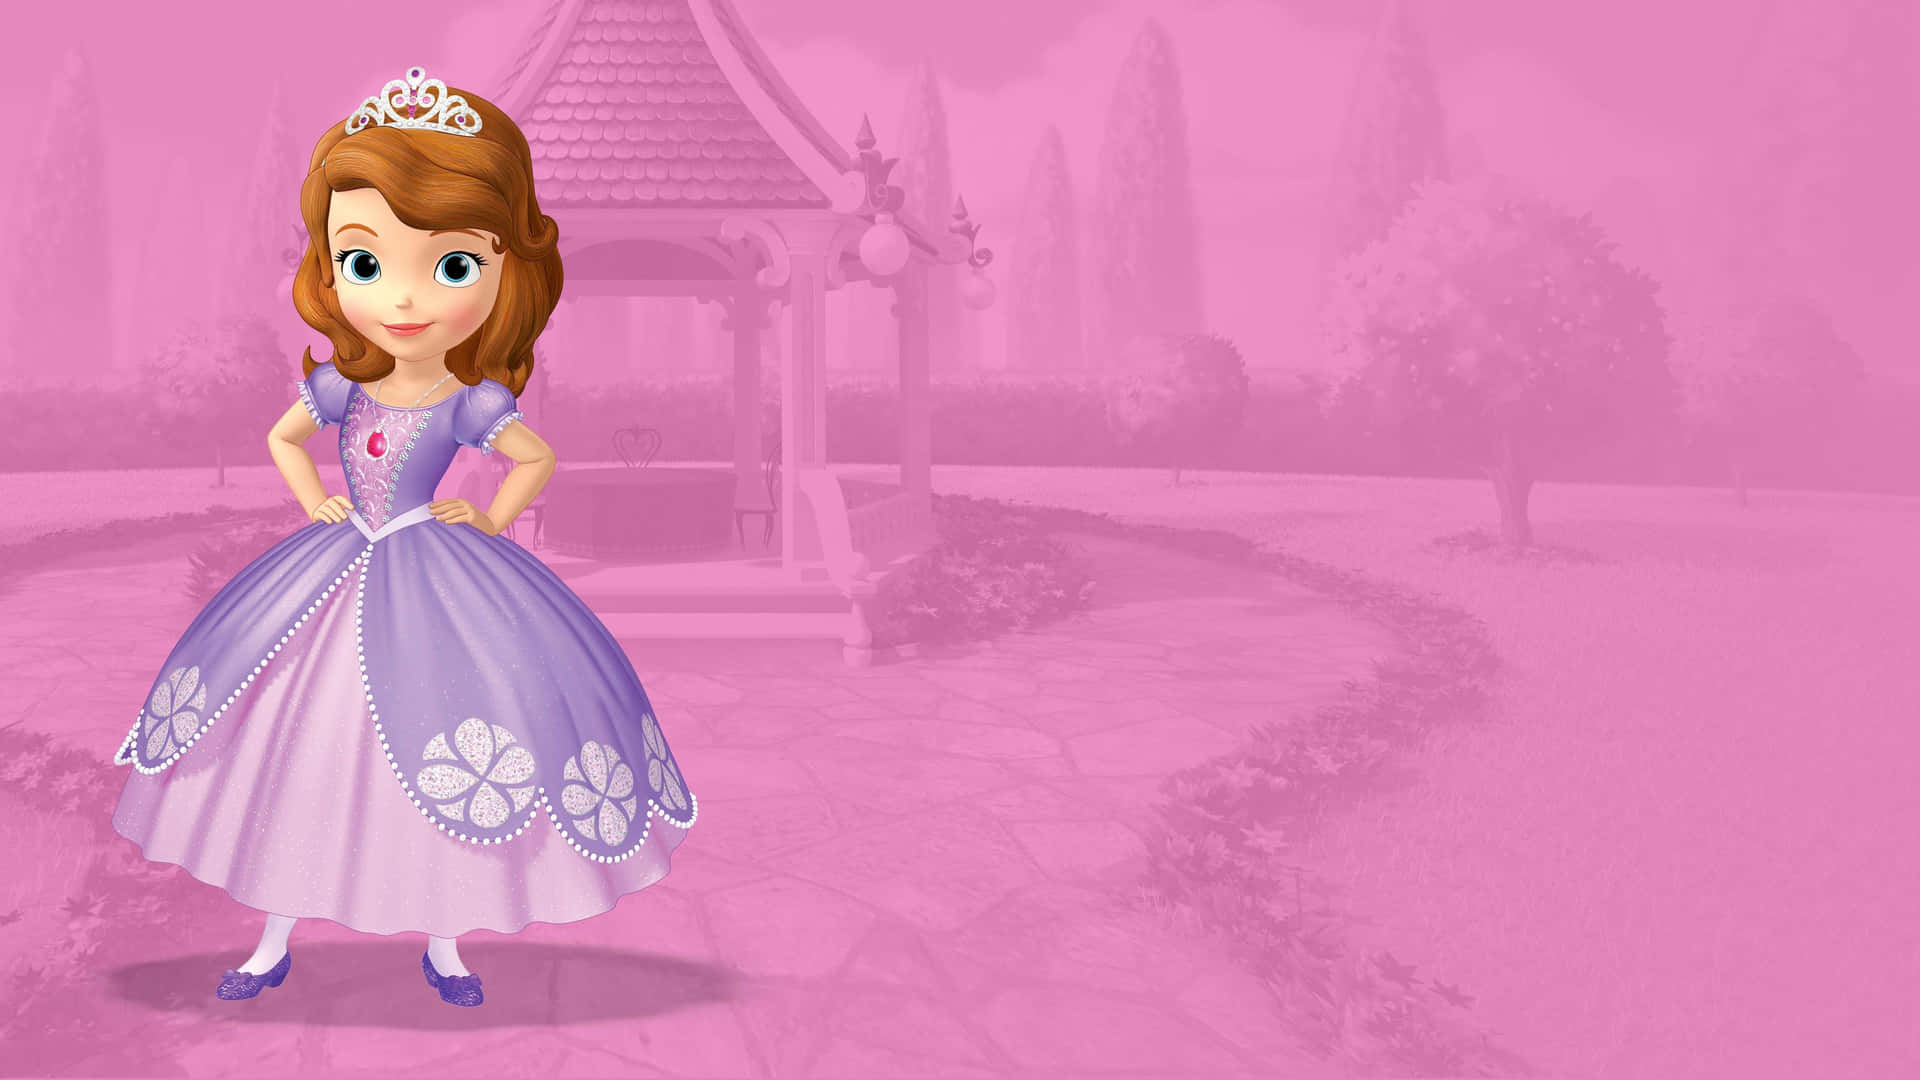 Download Sofia the First - Ready For Any Adventure Wallpaper ...